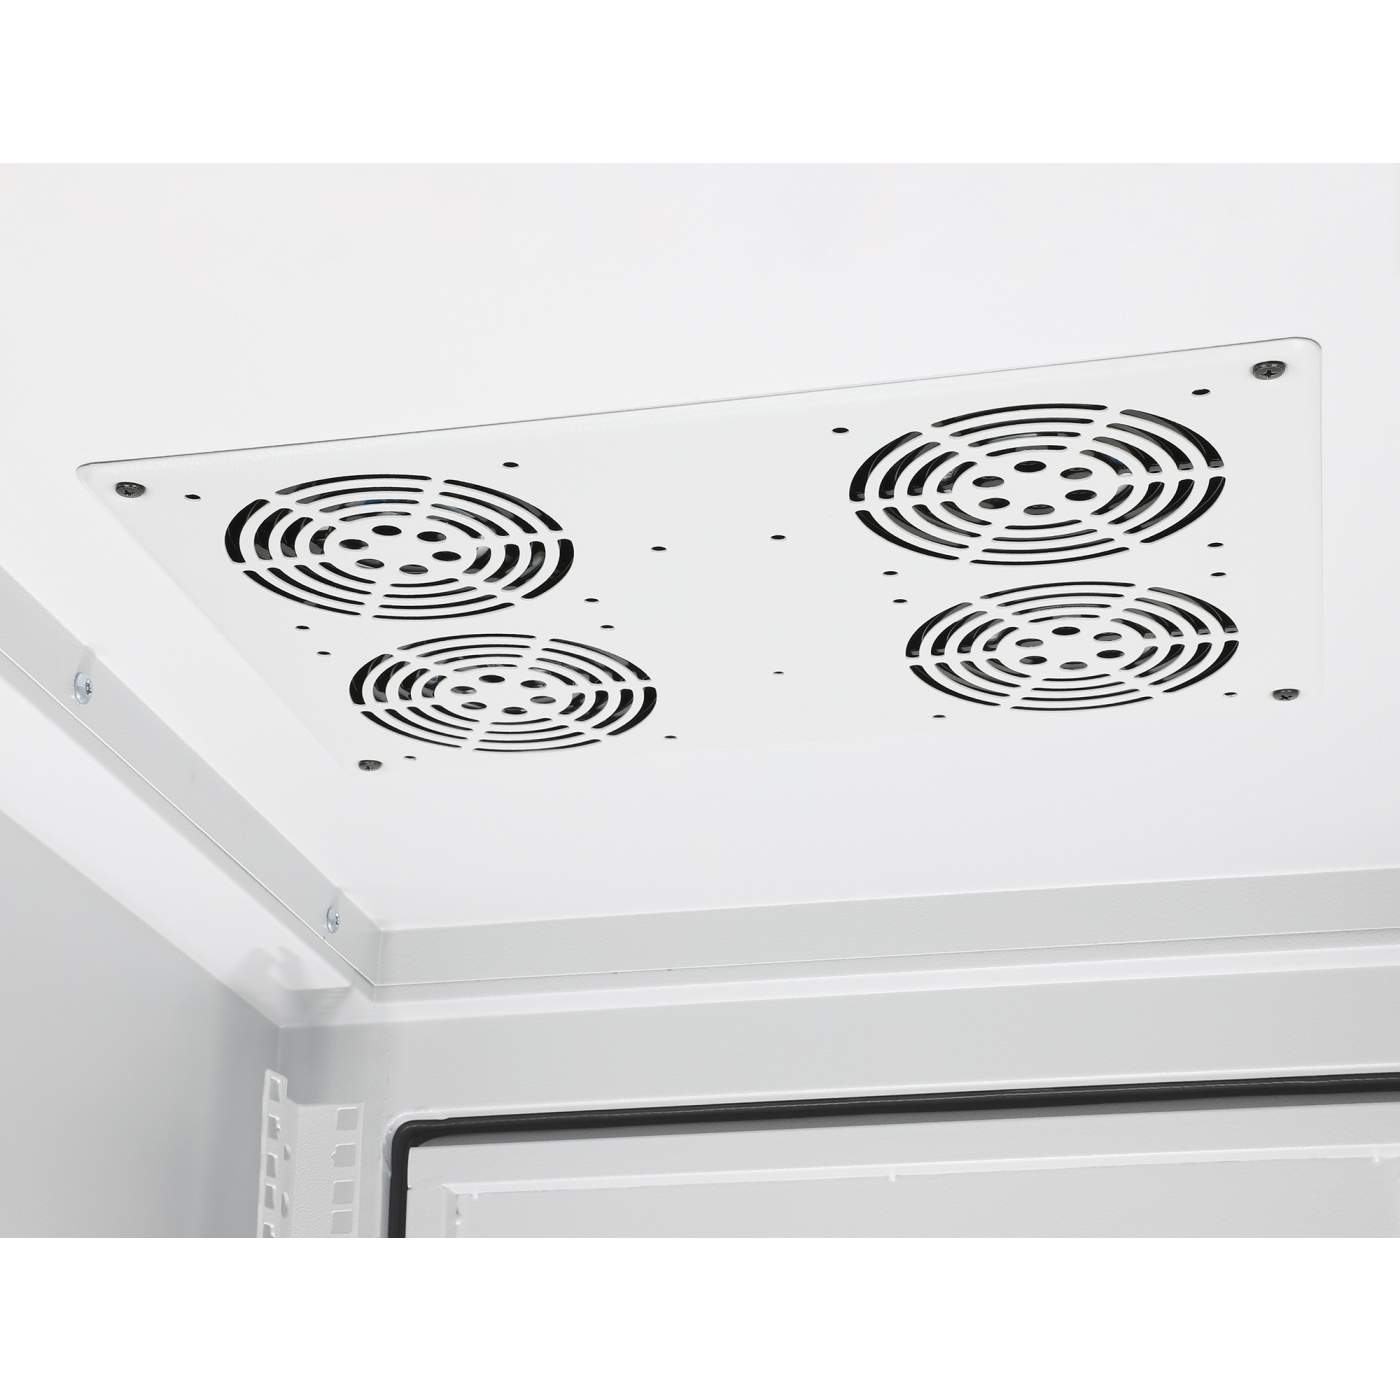 Industrial IP55 19" Network Cabinet with Integrated Fans, 27U Image 7